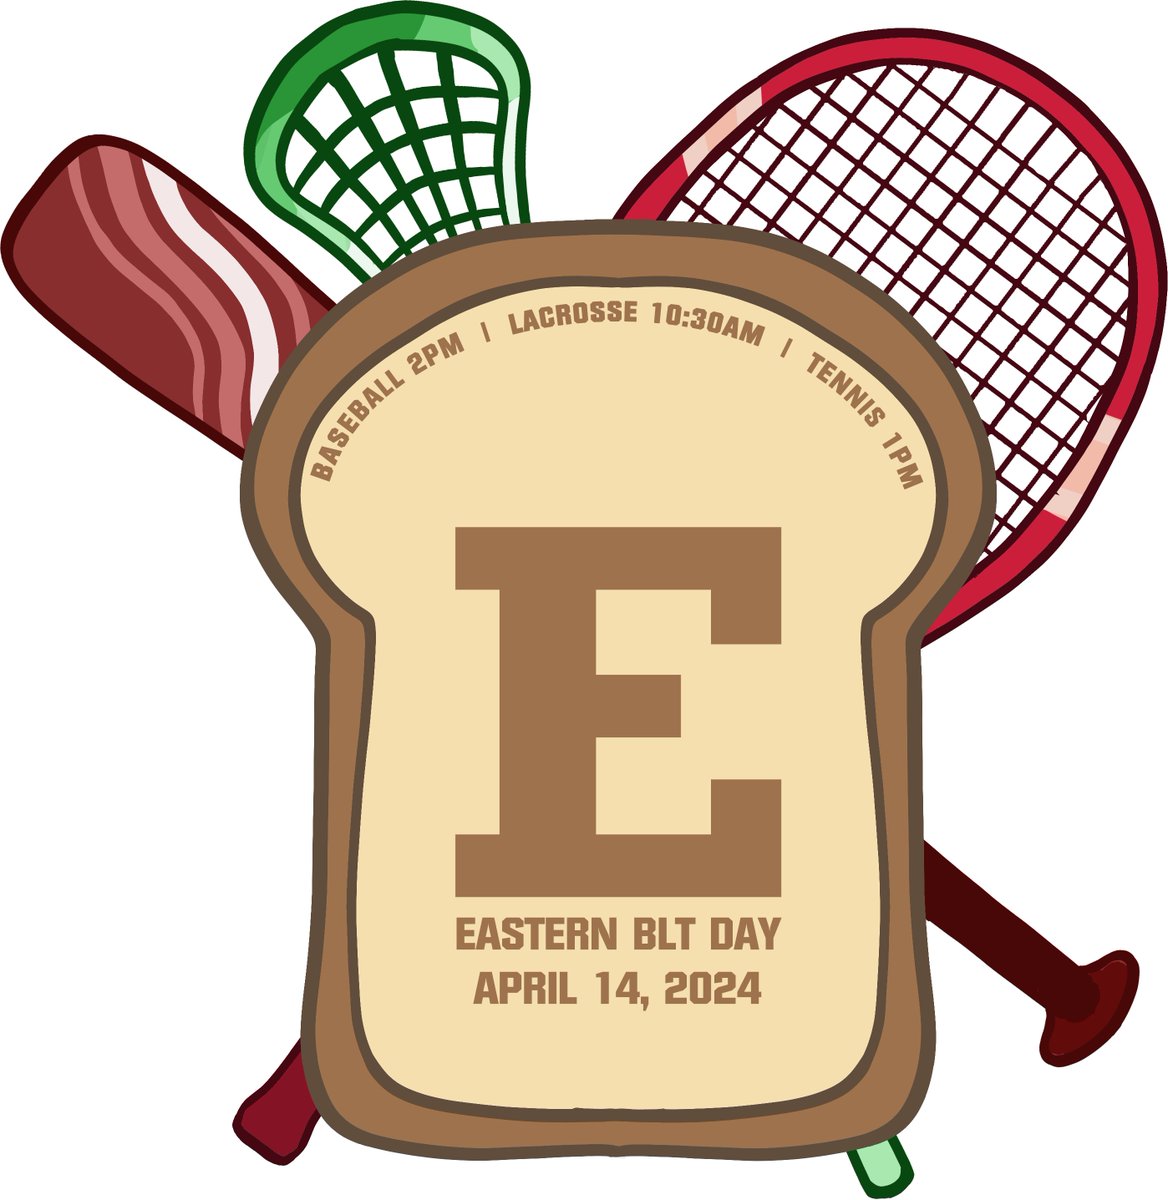 Today’s the day! #EasternBLTDay